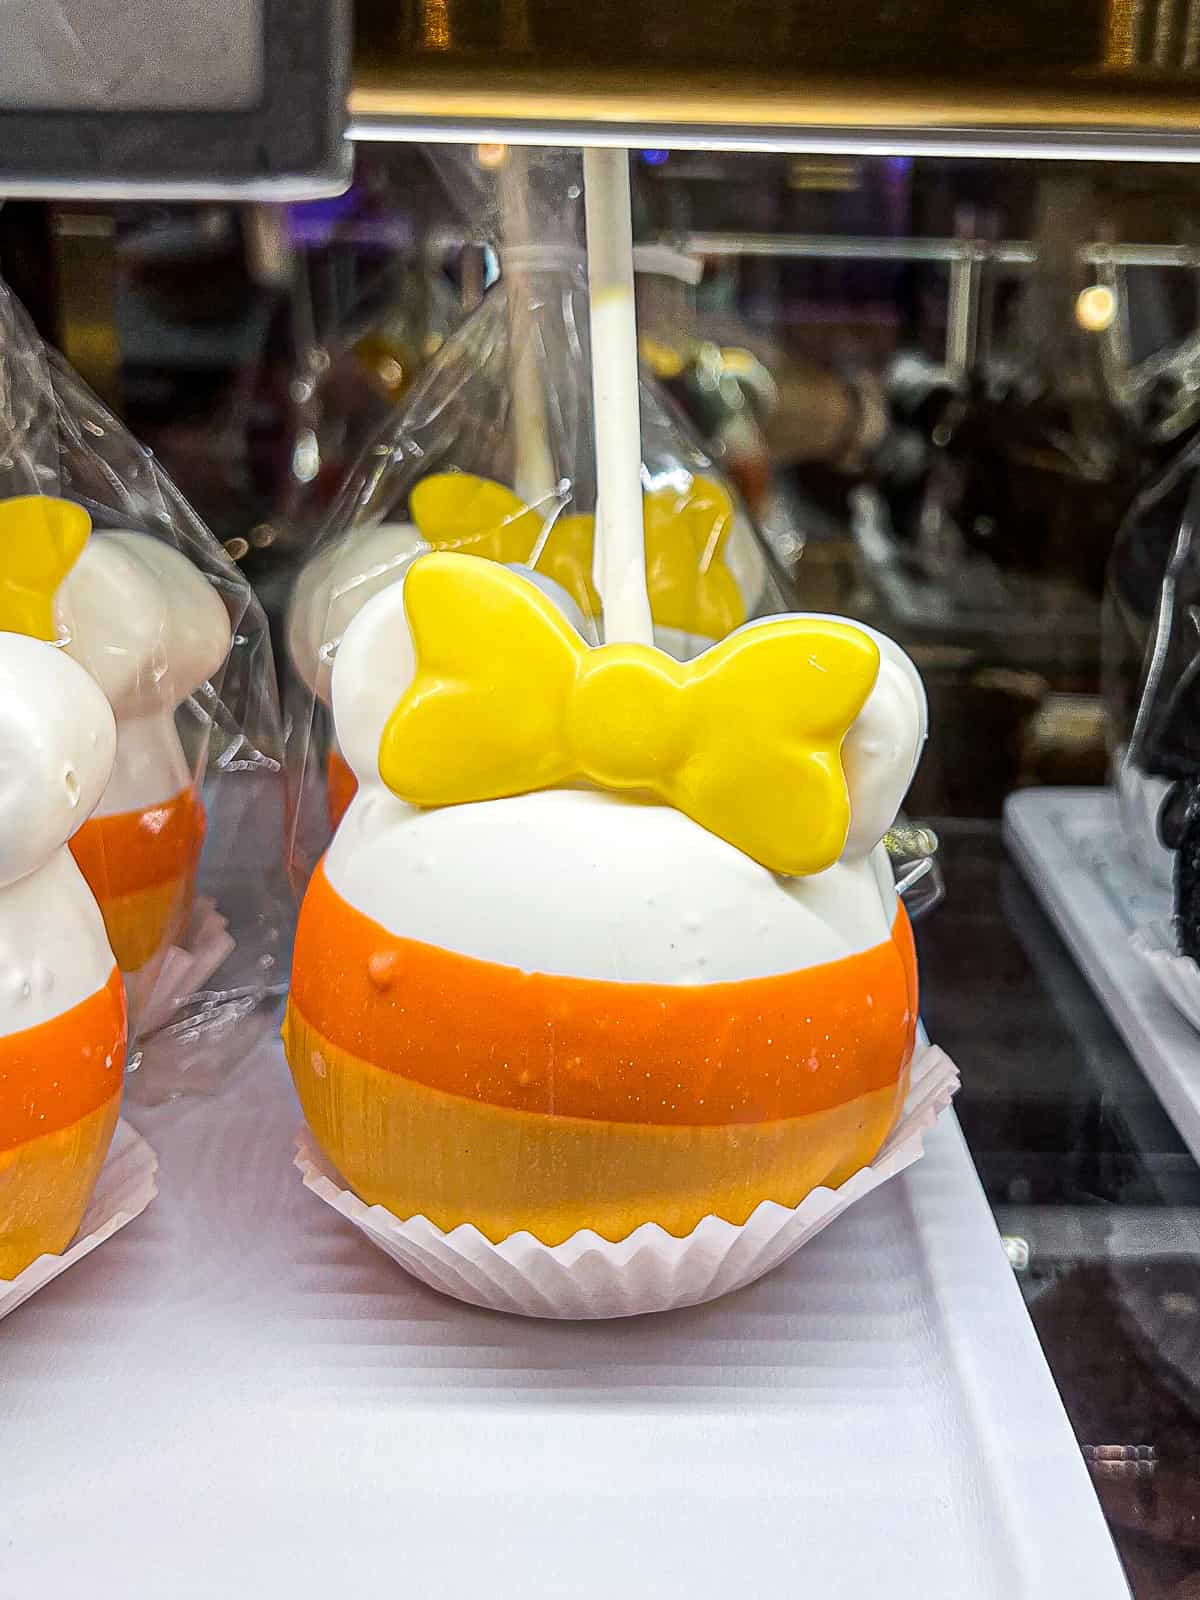 Halloween Time Caramel Apple in Candy Corn Coating with Minnie ears at Disneyland California